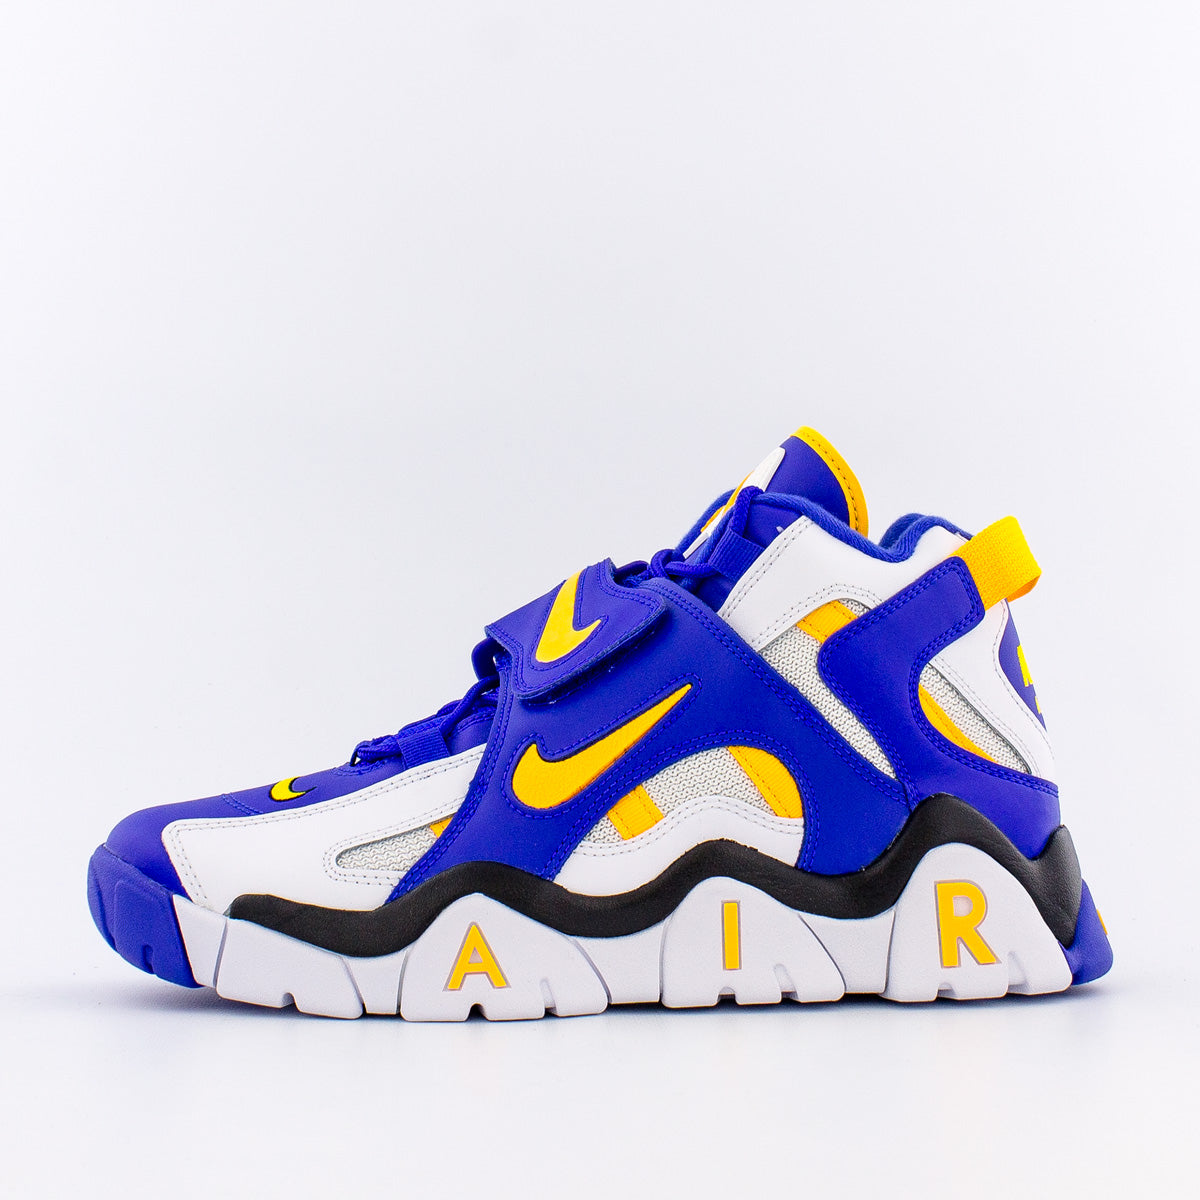 white and yellow nike air barrage